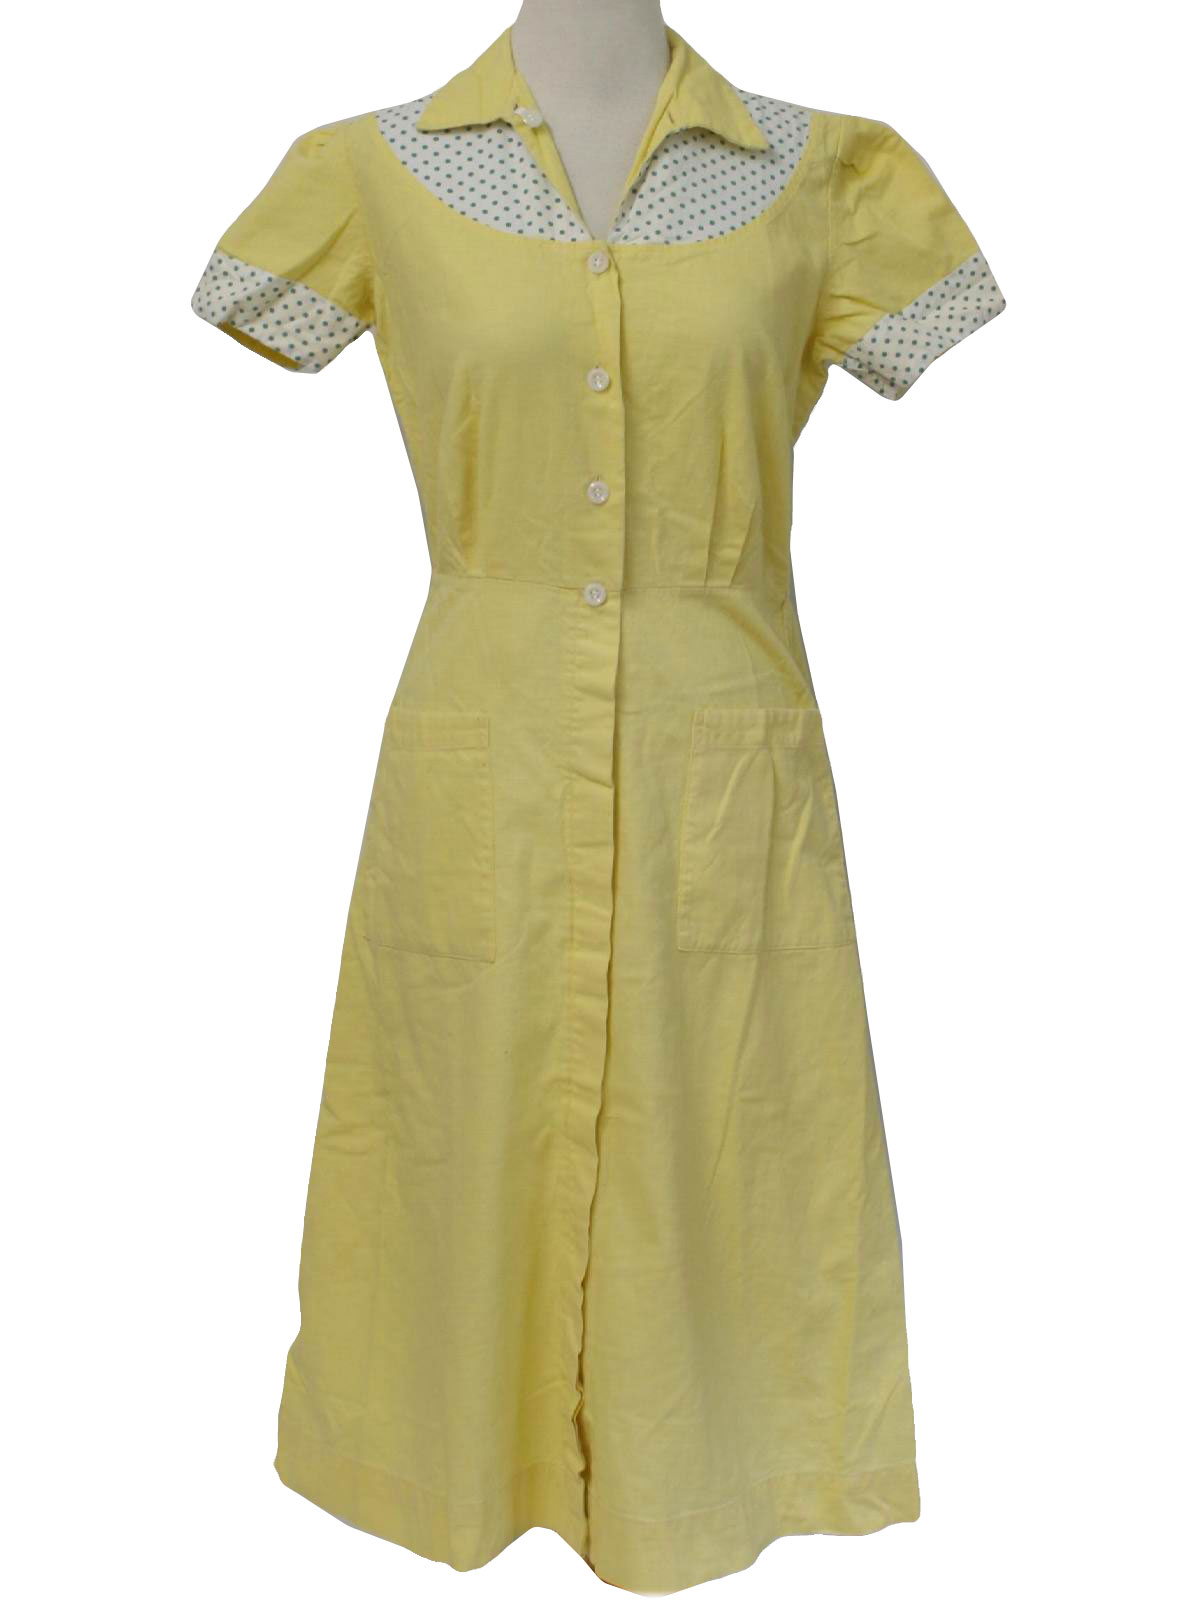 Vintage 40s Dress: Late 40s -Upland Uniforms 255 w.28th st New York, NY ...